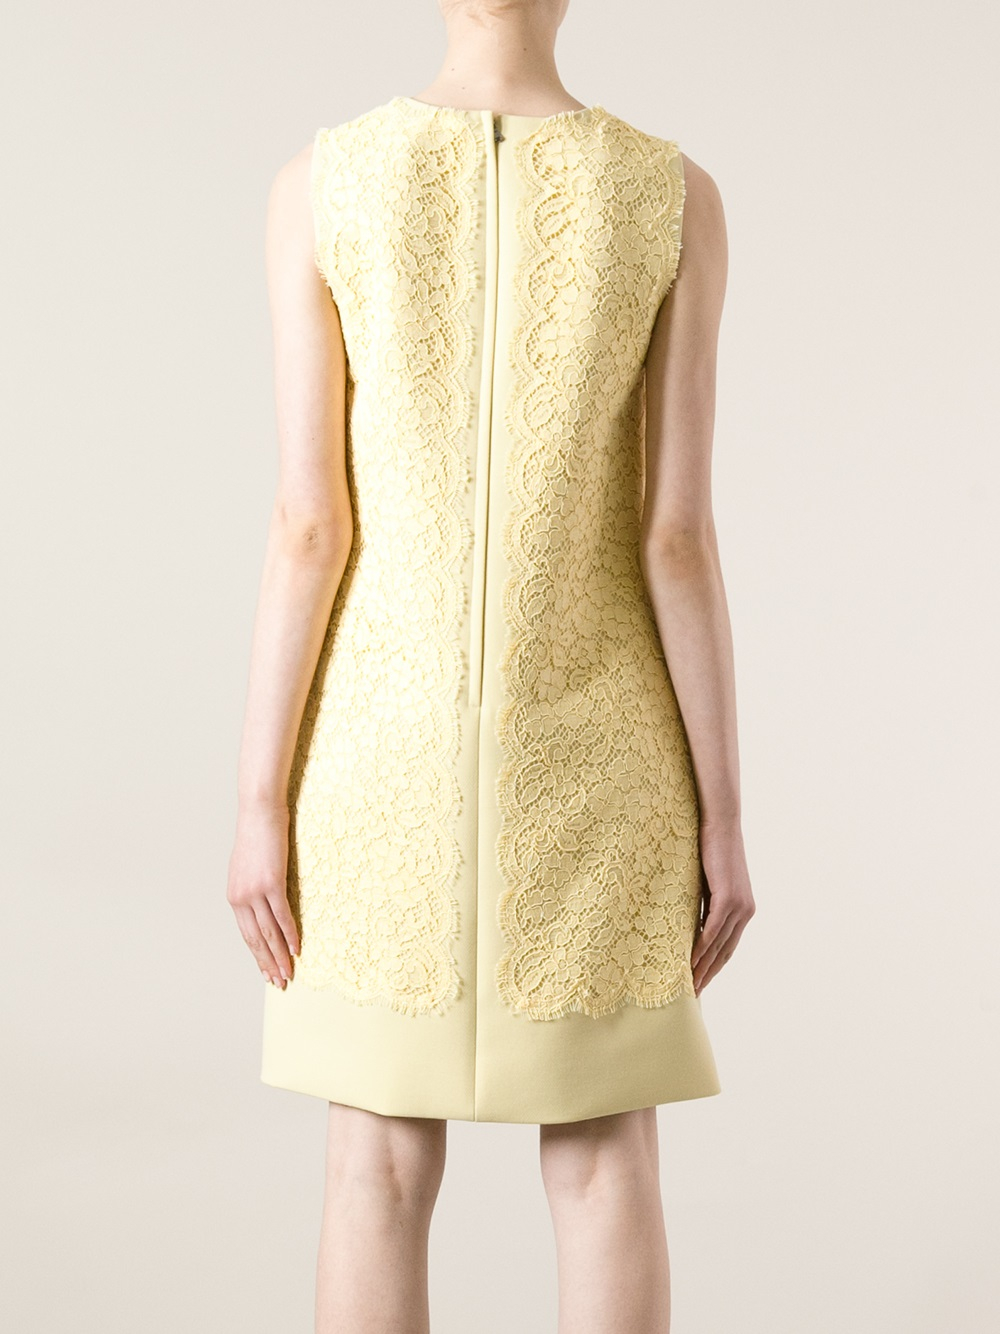 Lyst - Dolce & Gabbana Sleeveless Floral Lace Dress in Yellow